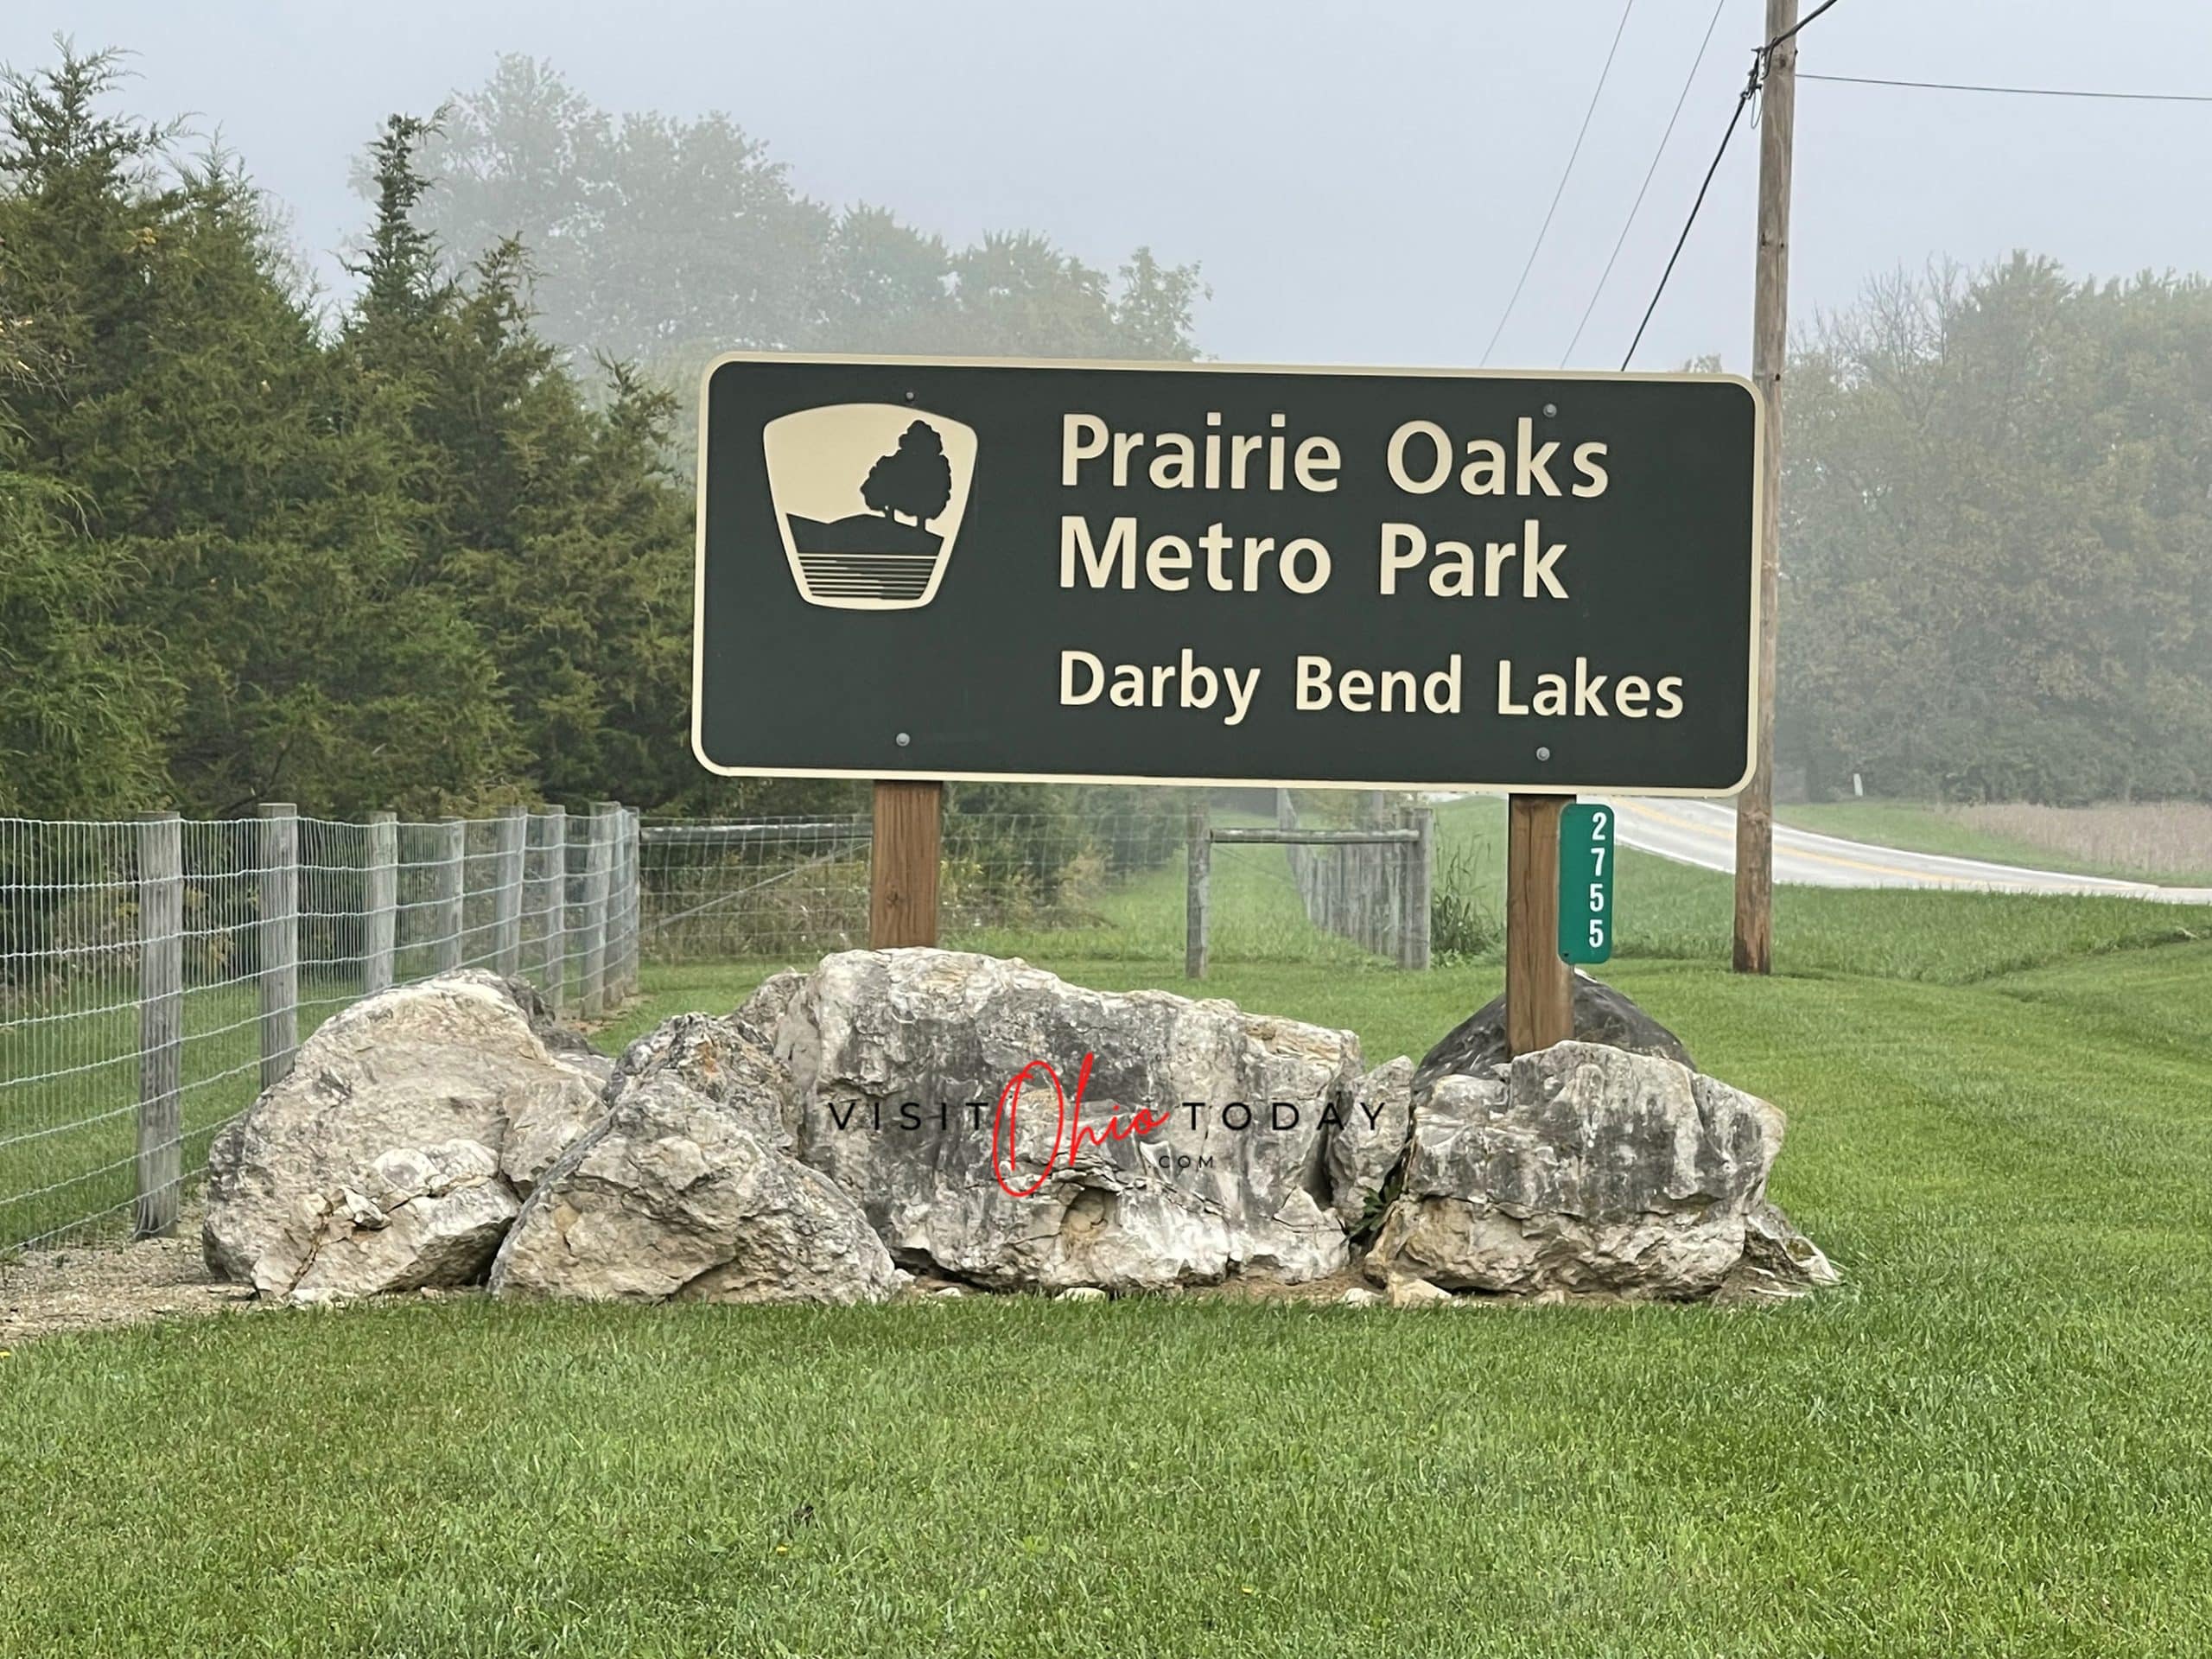 horizontal photo showing the entrance sign to the Darby Bend Lakes area of Prairie Oaks Metro Park